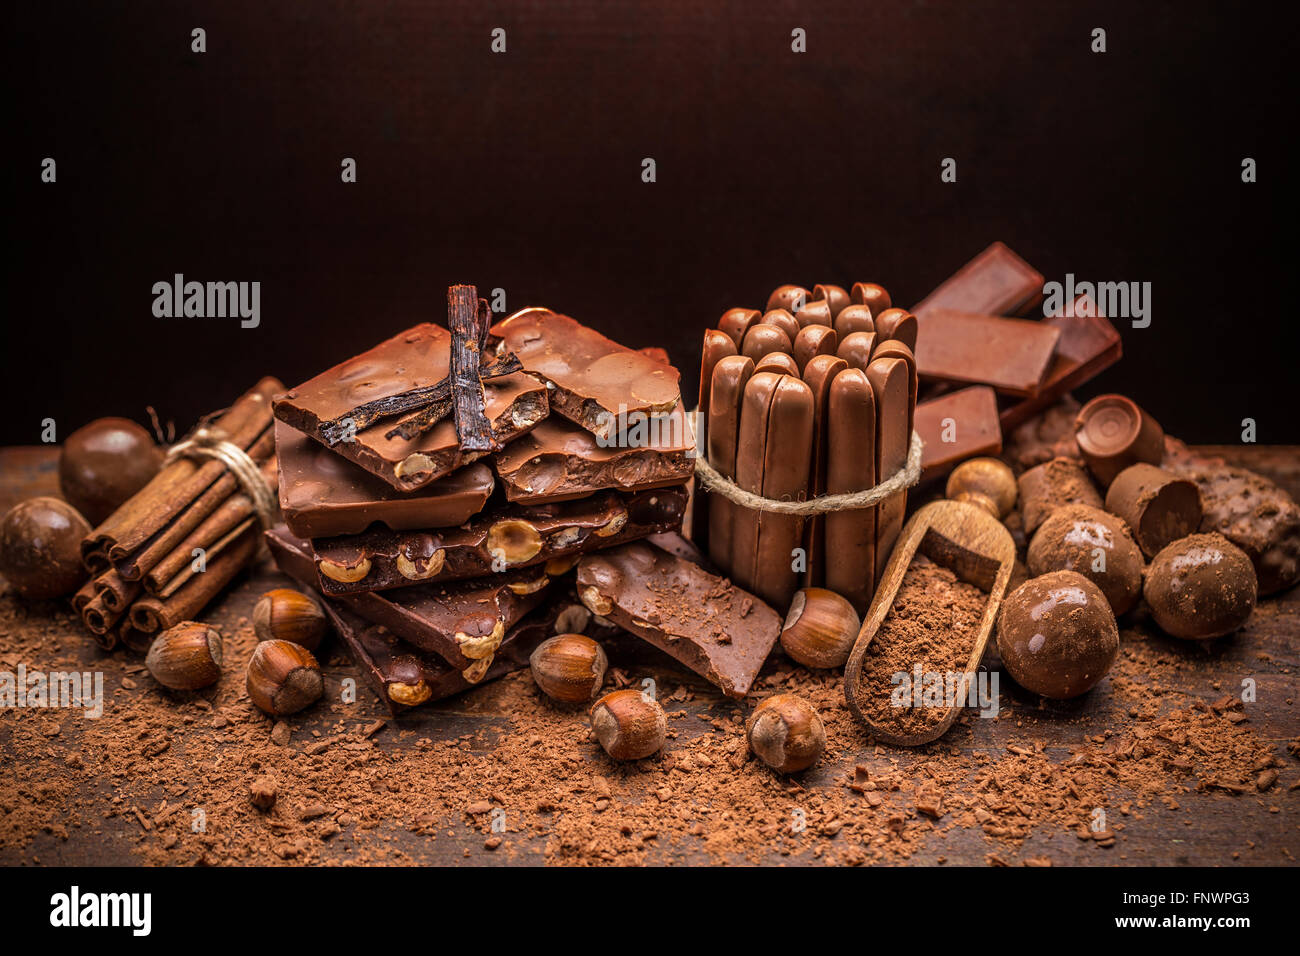 Concept of sweet milk chocolate with nuts Stock Photo